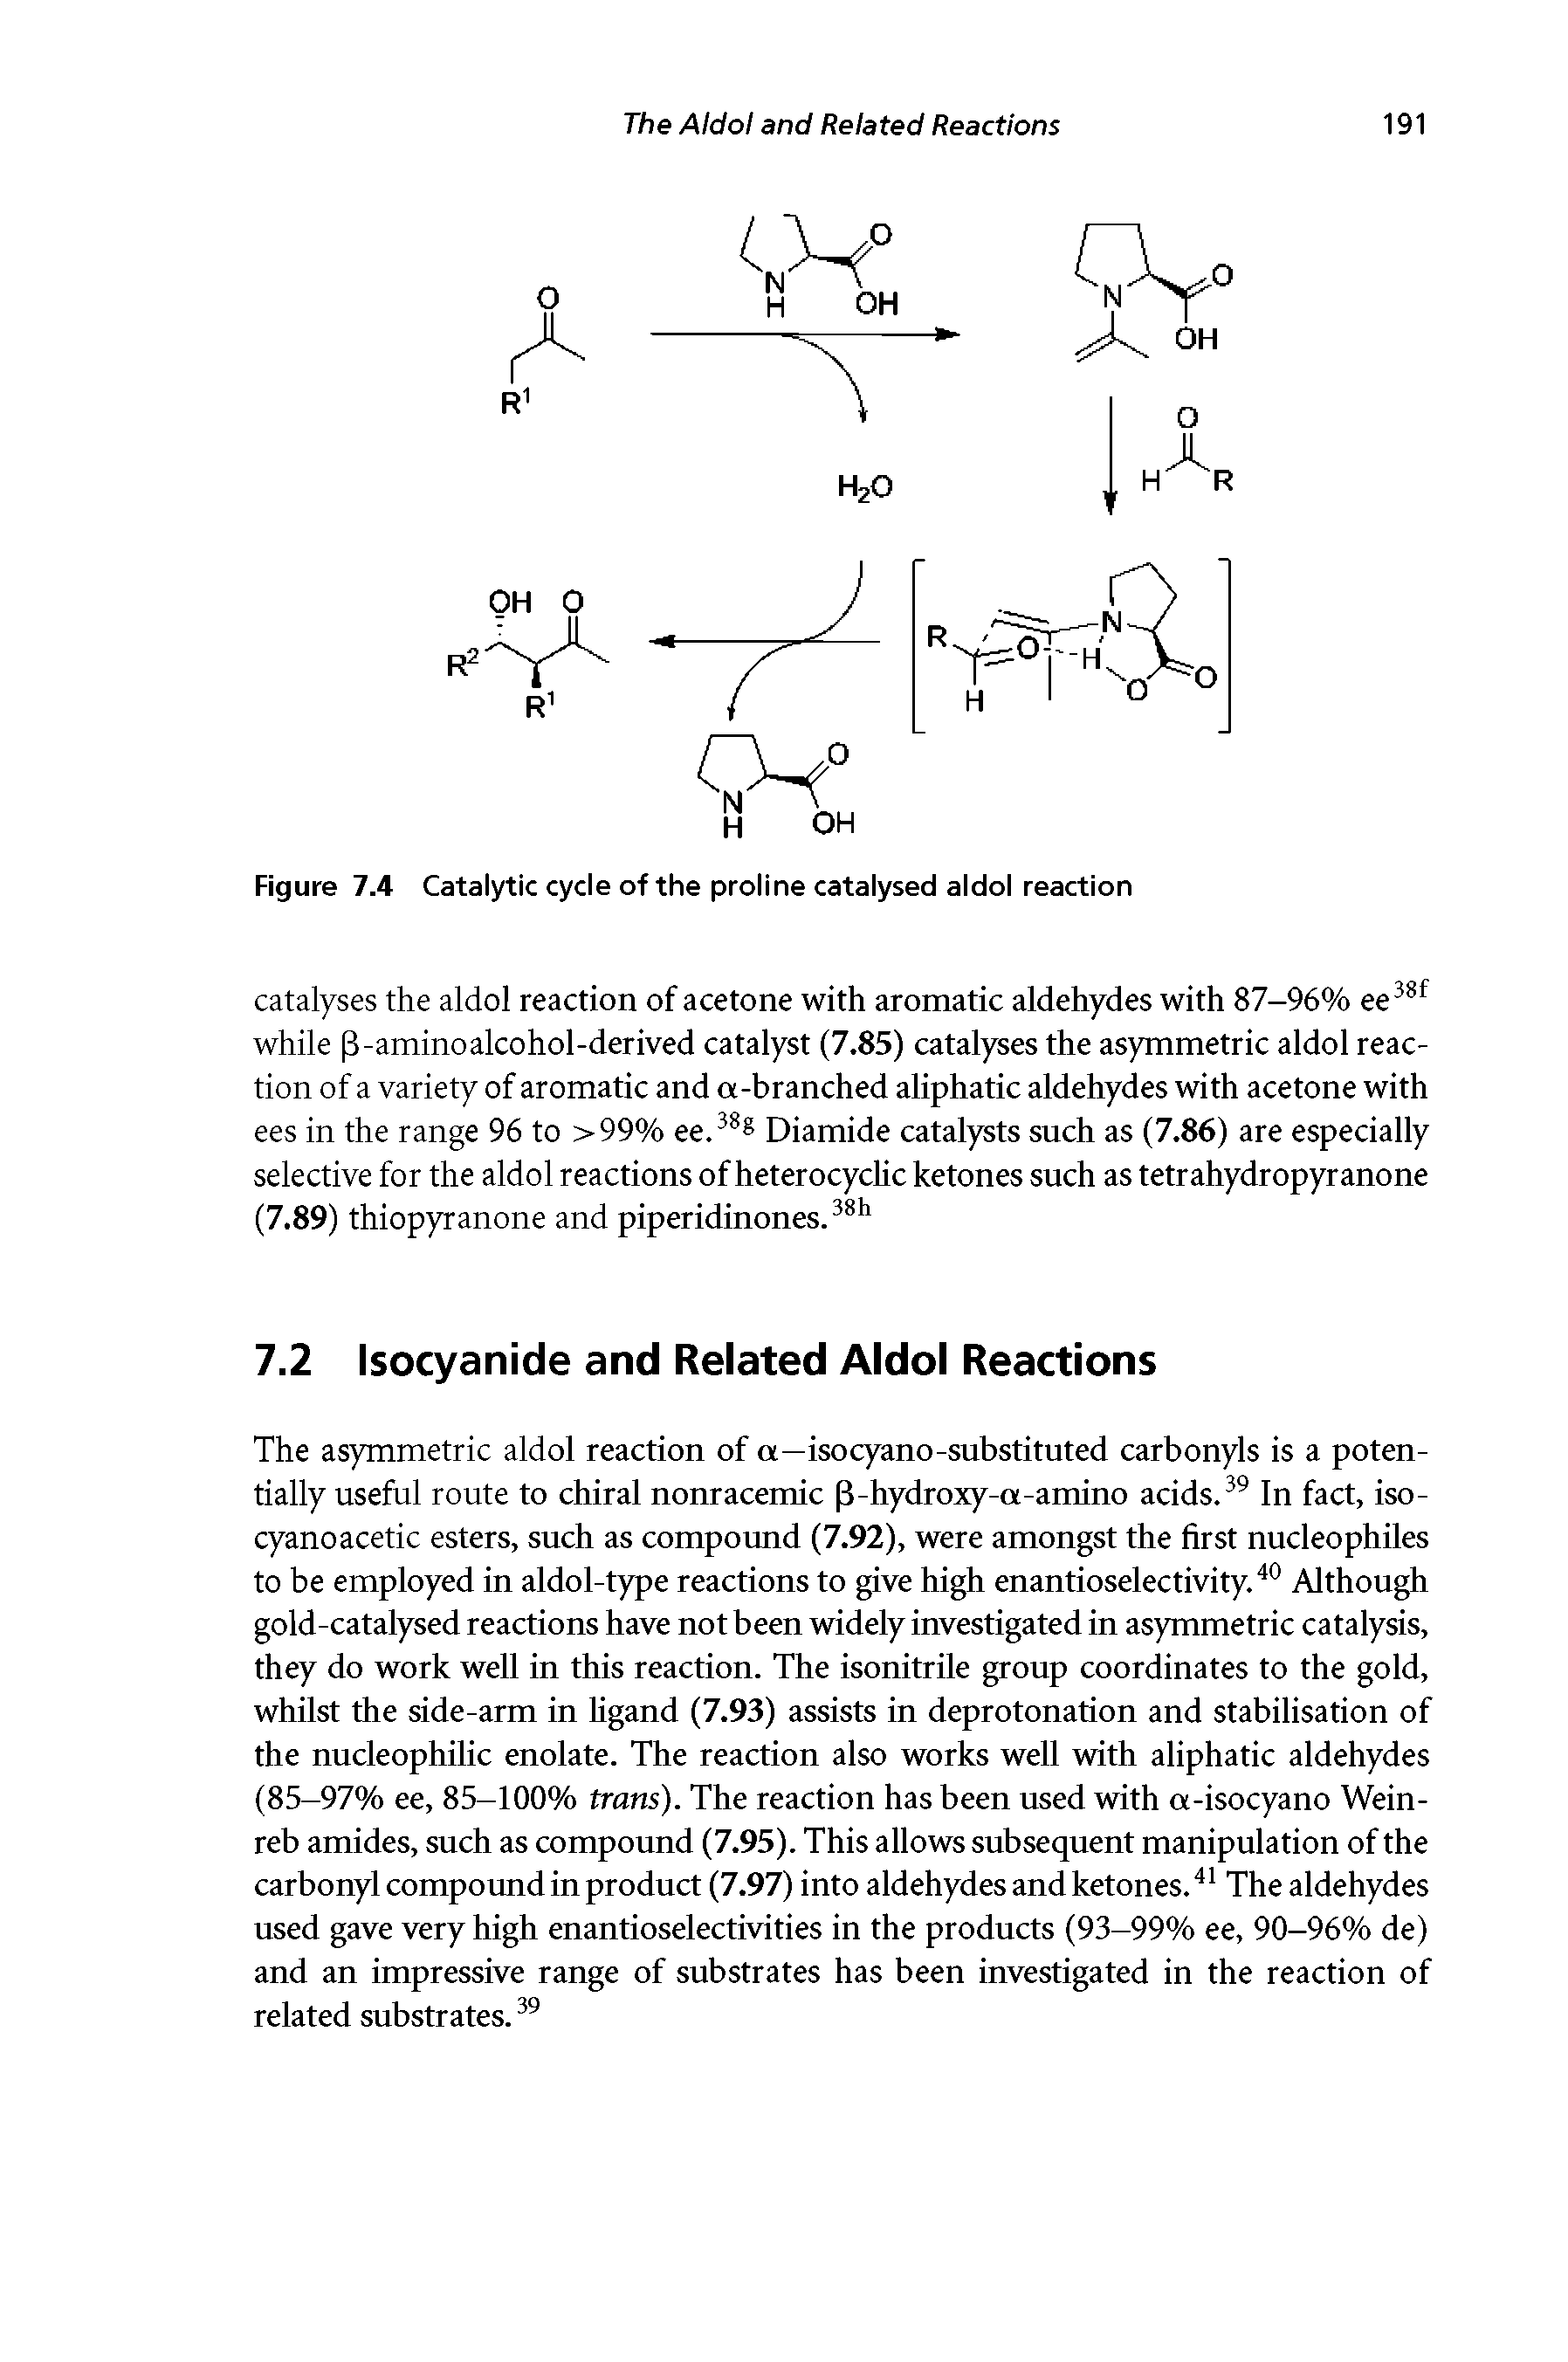 Figure 7.4 Catalytic cycle of the proline catalysed aldol reaction...